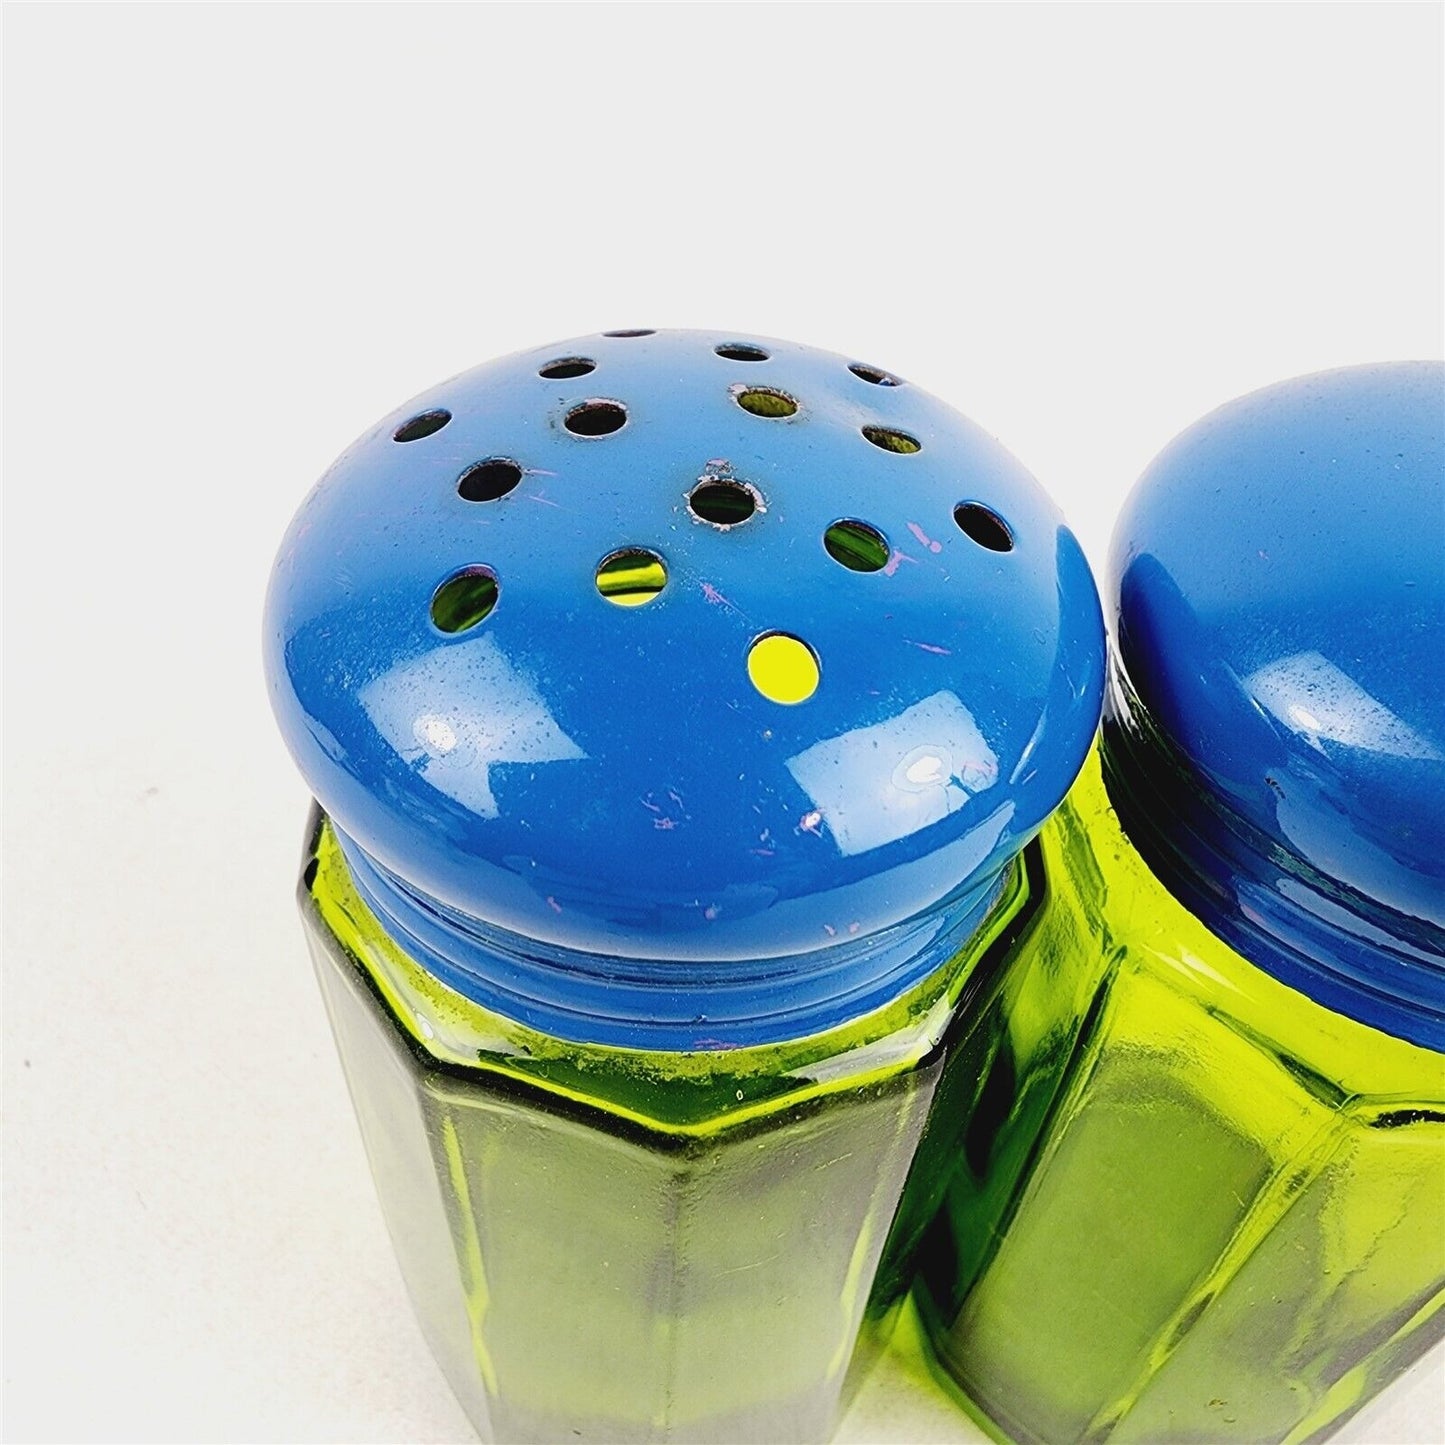 Vintage 1960s Shaker Set Green Glass Blue Metal Top Lid Made in Japan - 5" tall